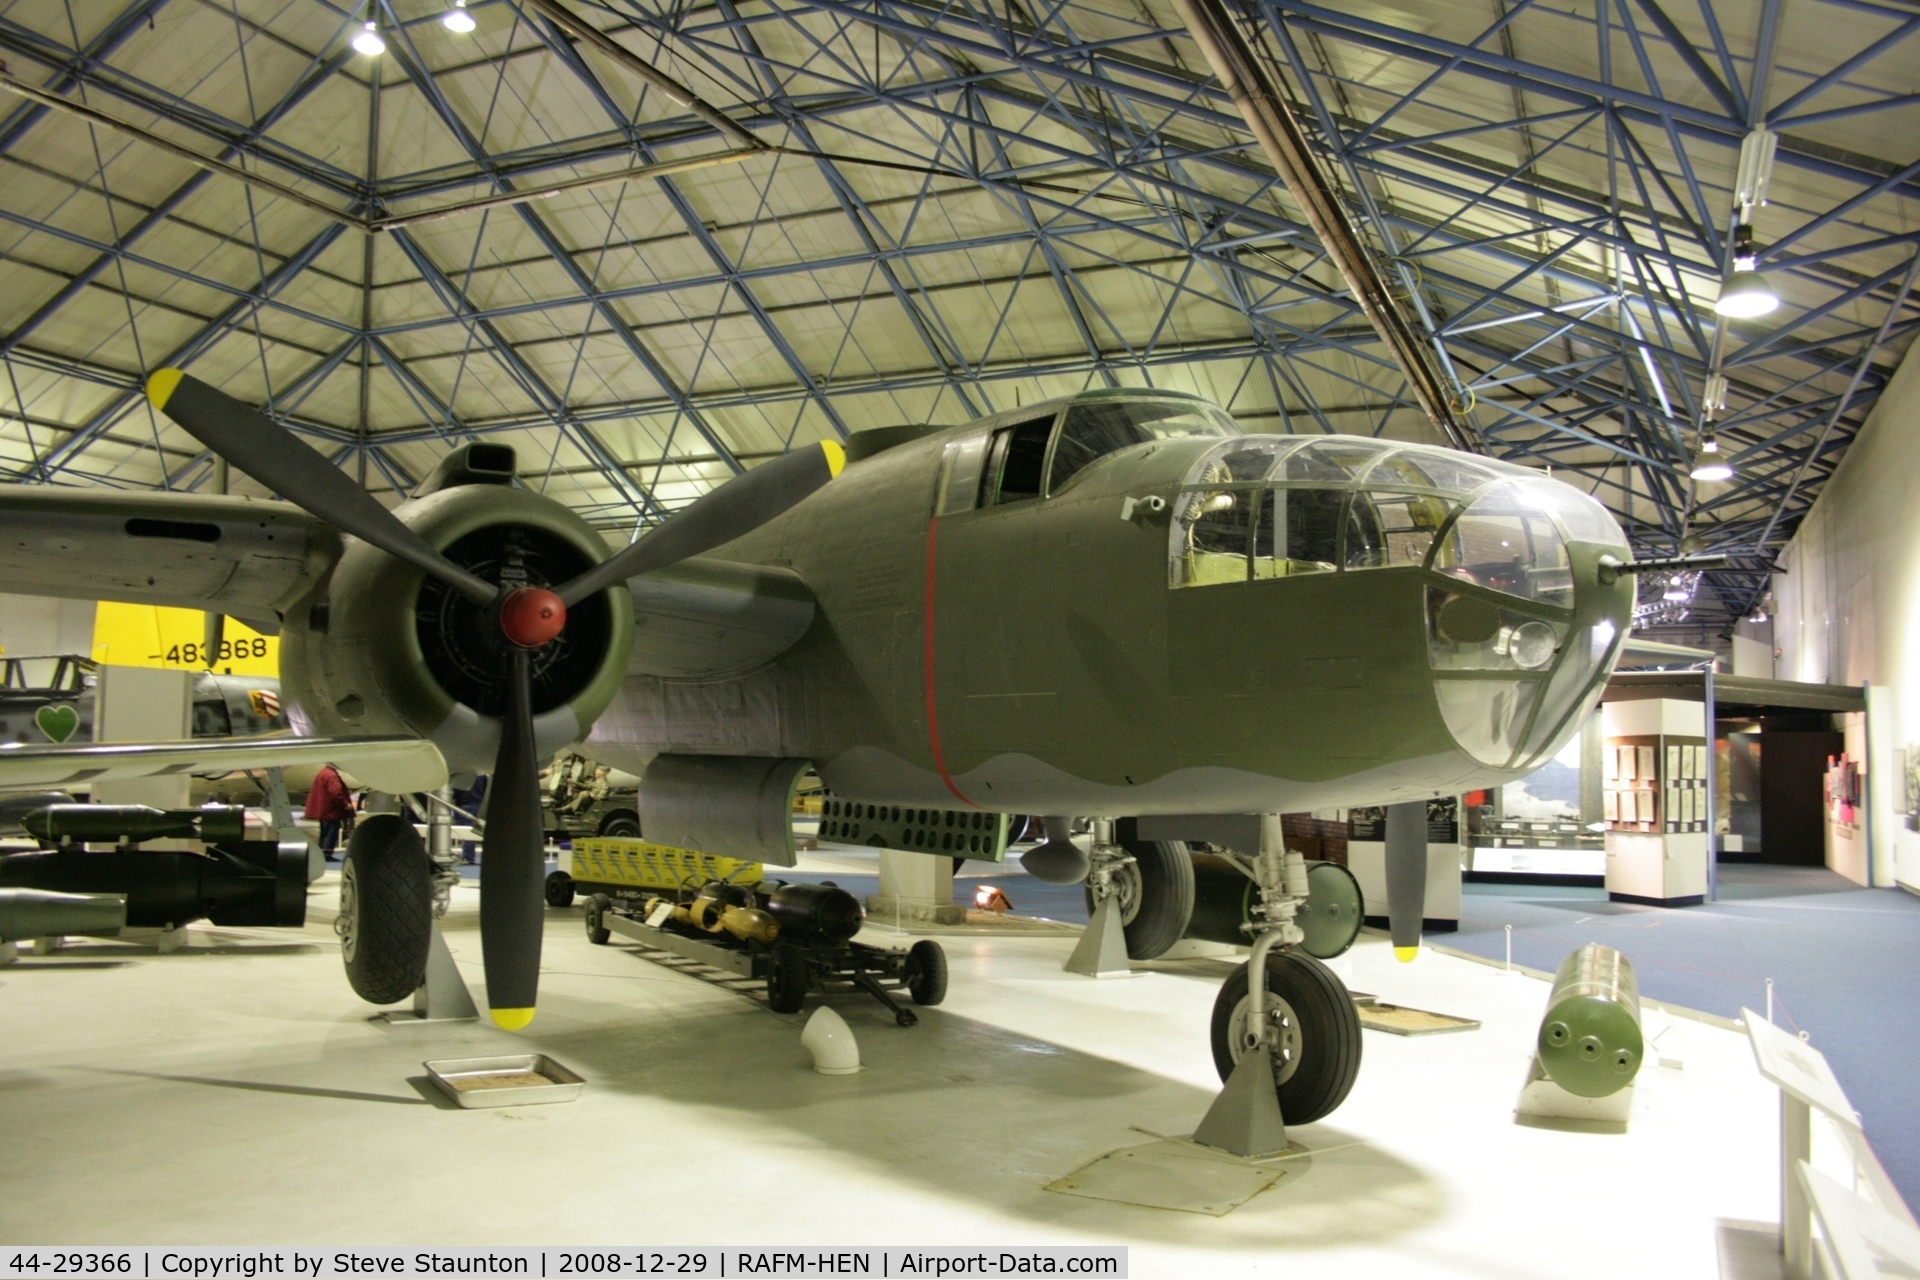 44-29366, North American TB-25N Mitchell C/N 108-32461, Taken at the RAF Museum, Hendon. December 2008